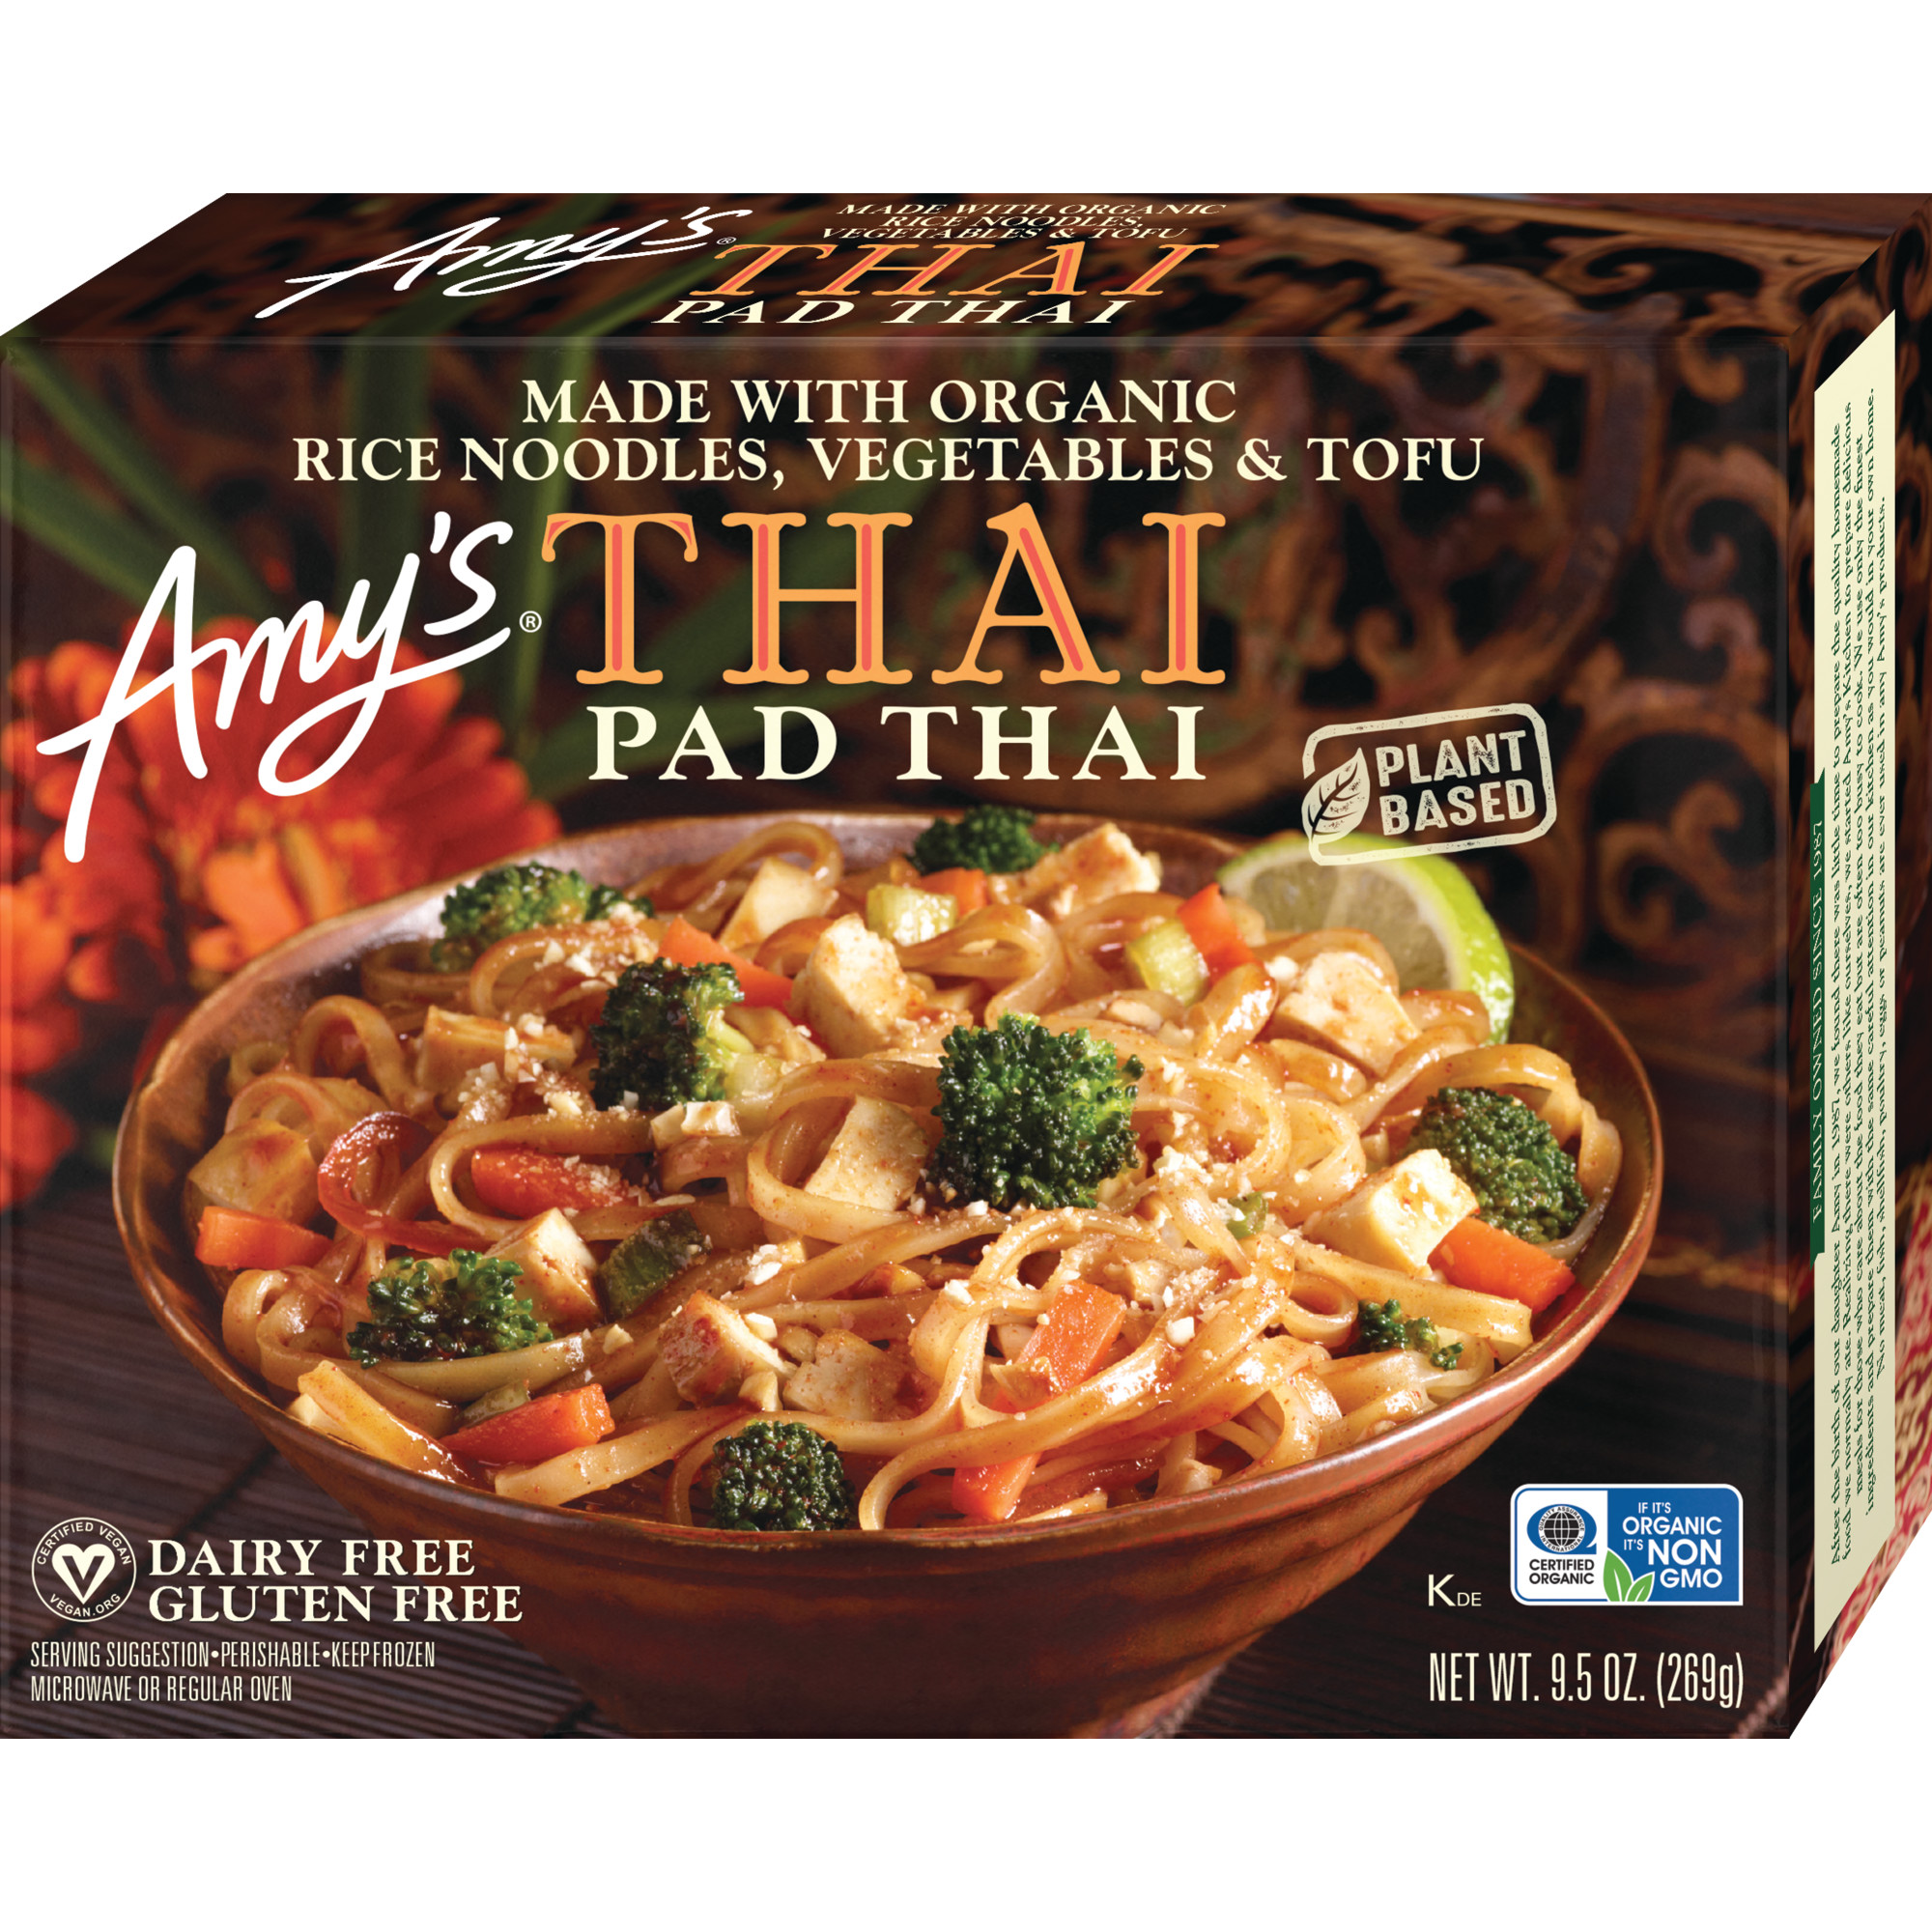 Amy's Kitchen Frozen Meals, Pad Thai, Gluten Free Microwave Meals, 9.5 oz - image 1 of 7